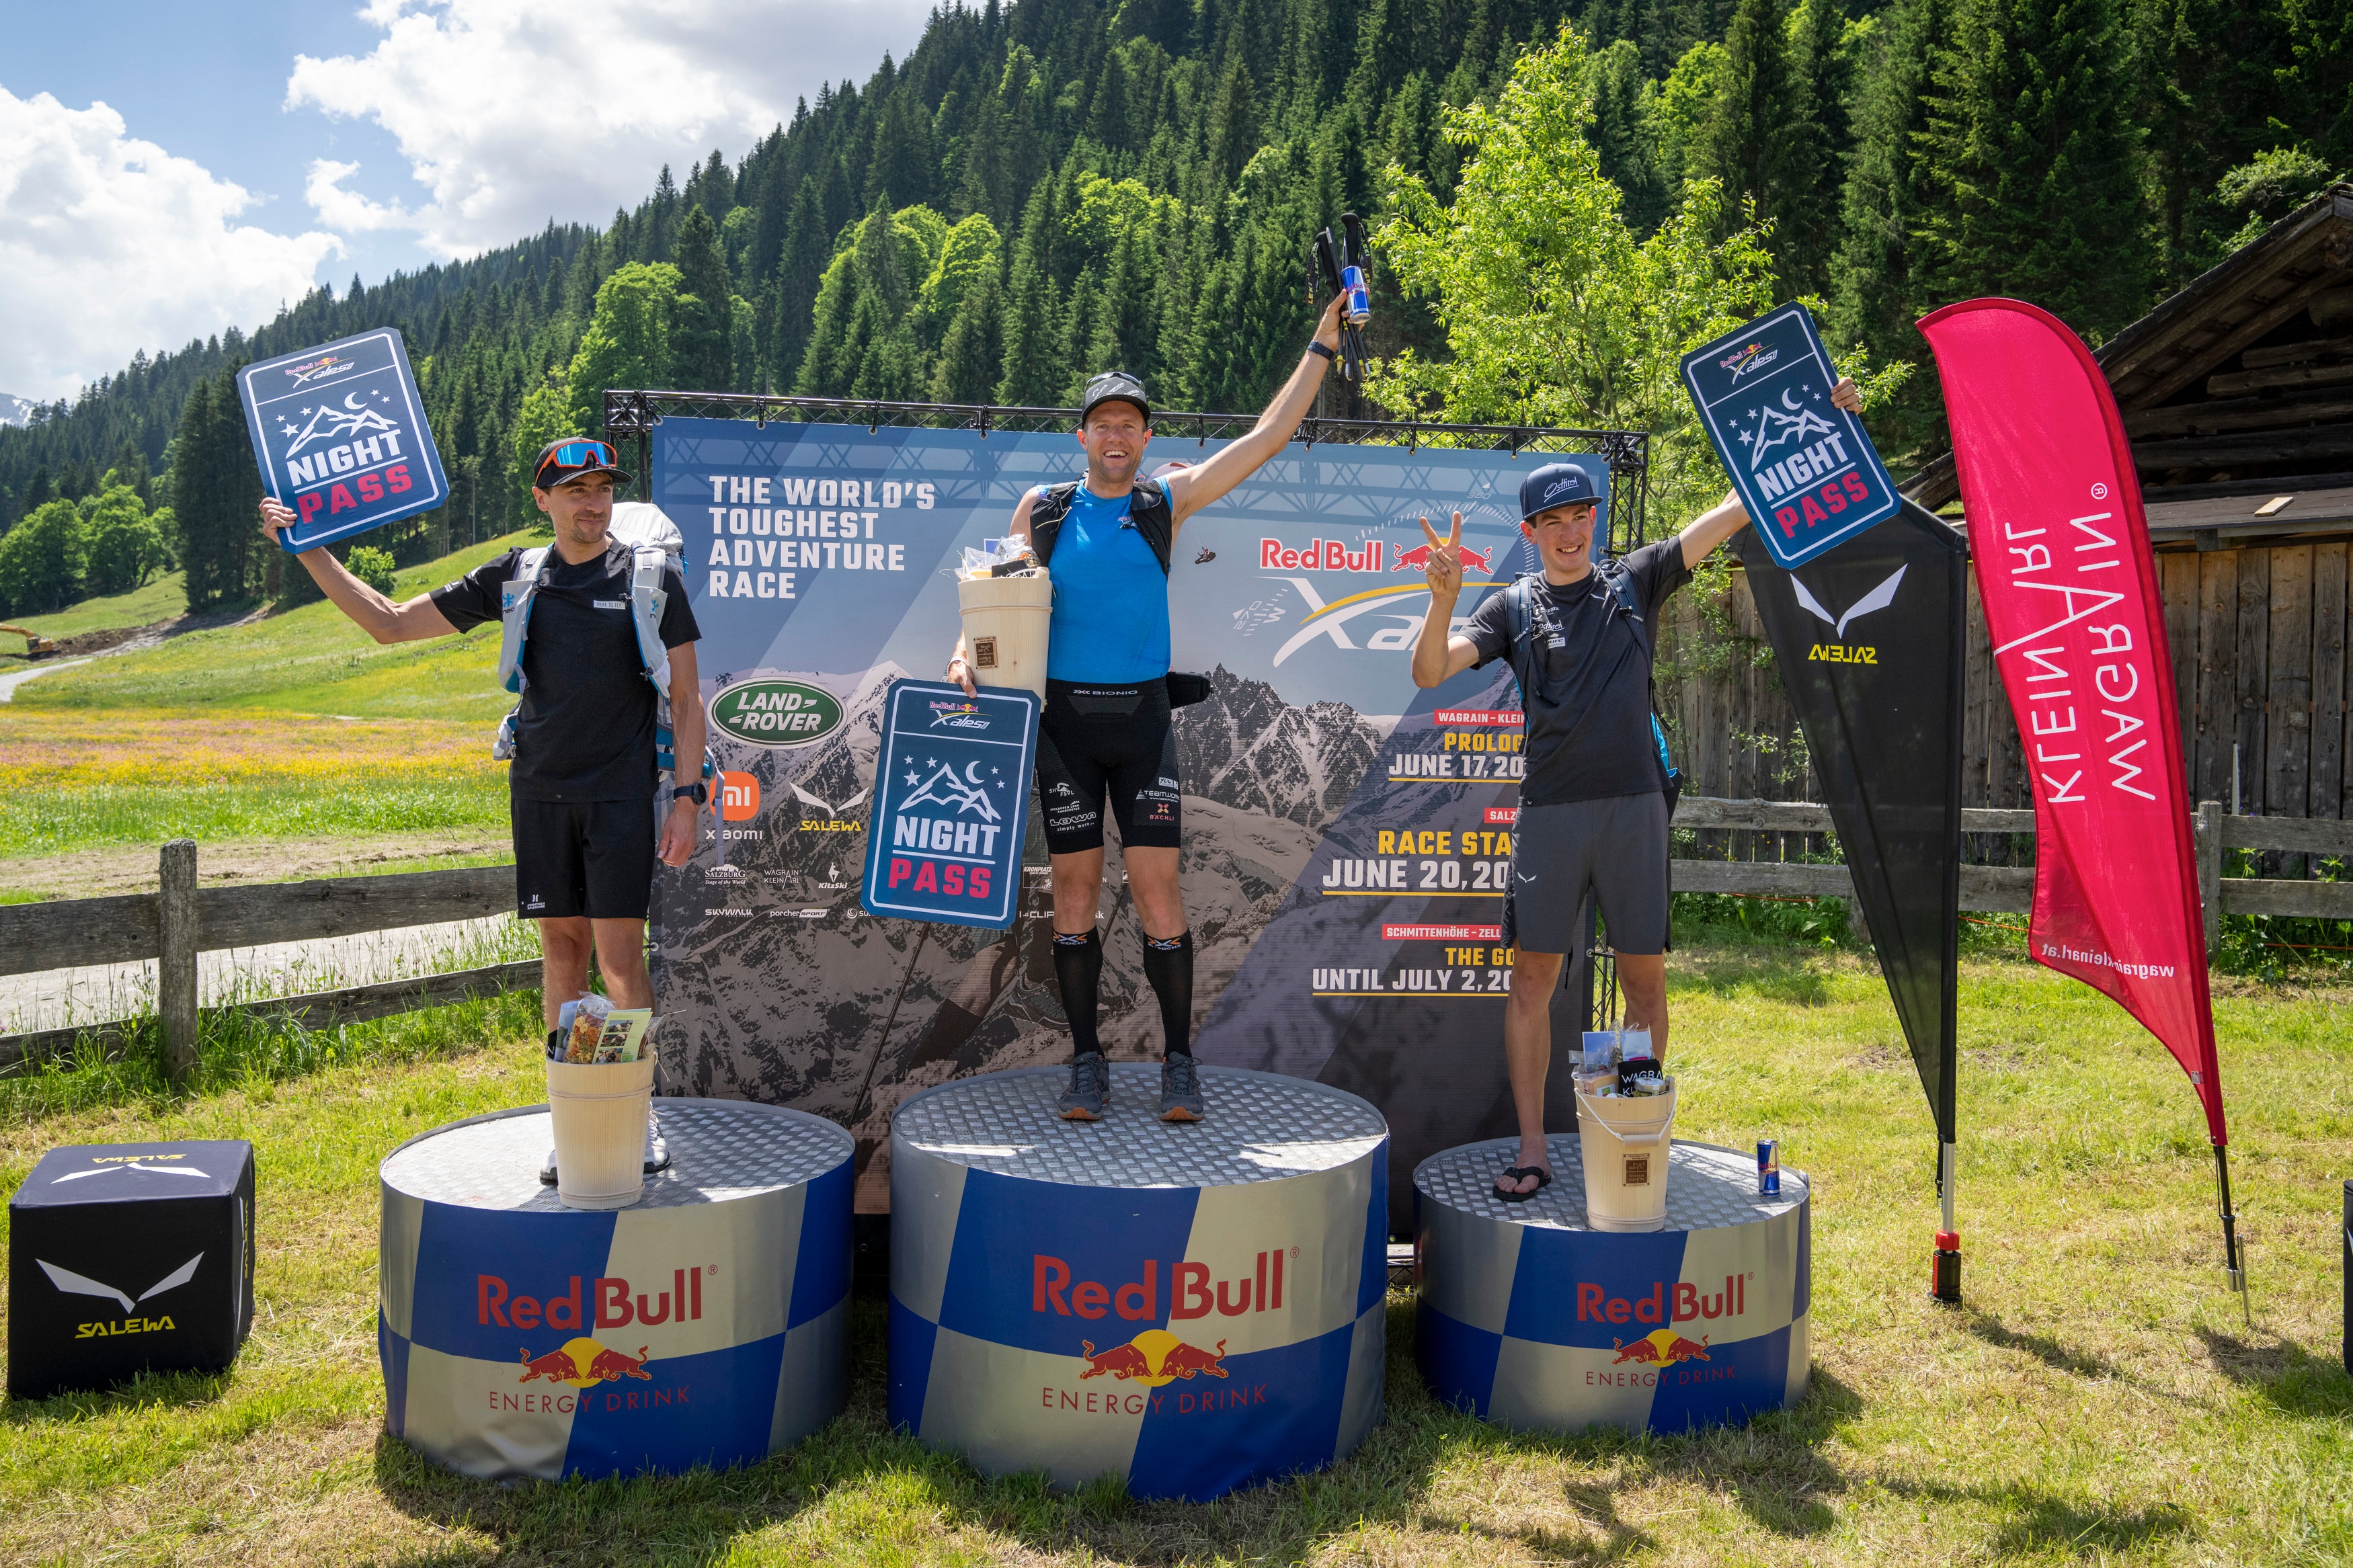 RBC performing during the Red Bull X-Alps Prologue in Kleinarl, Austria on June 17, 2021.